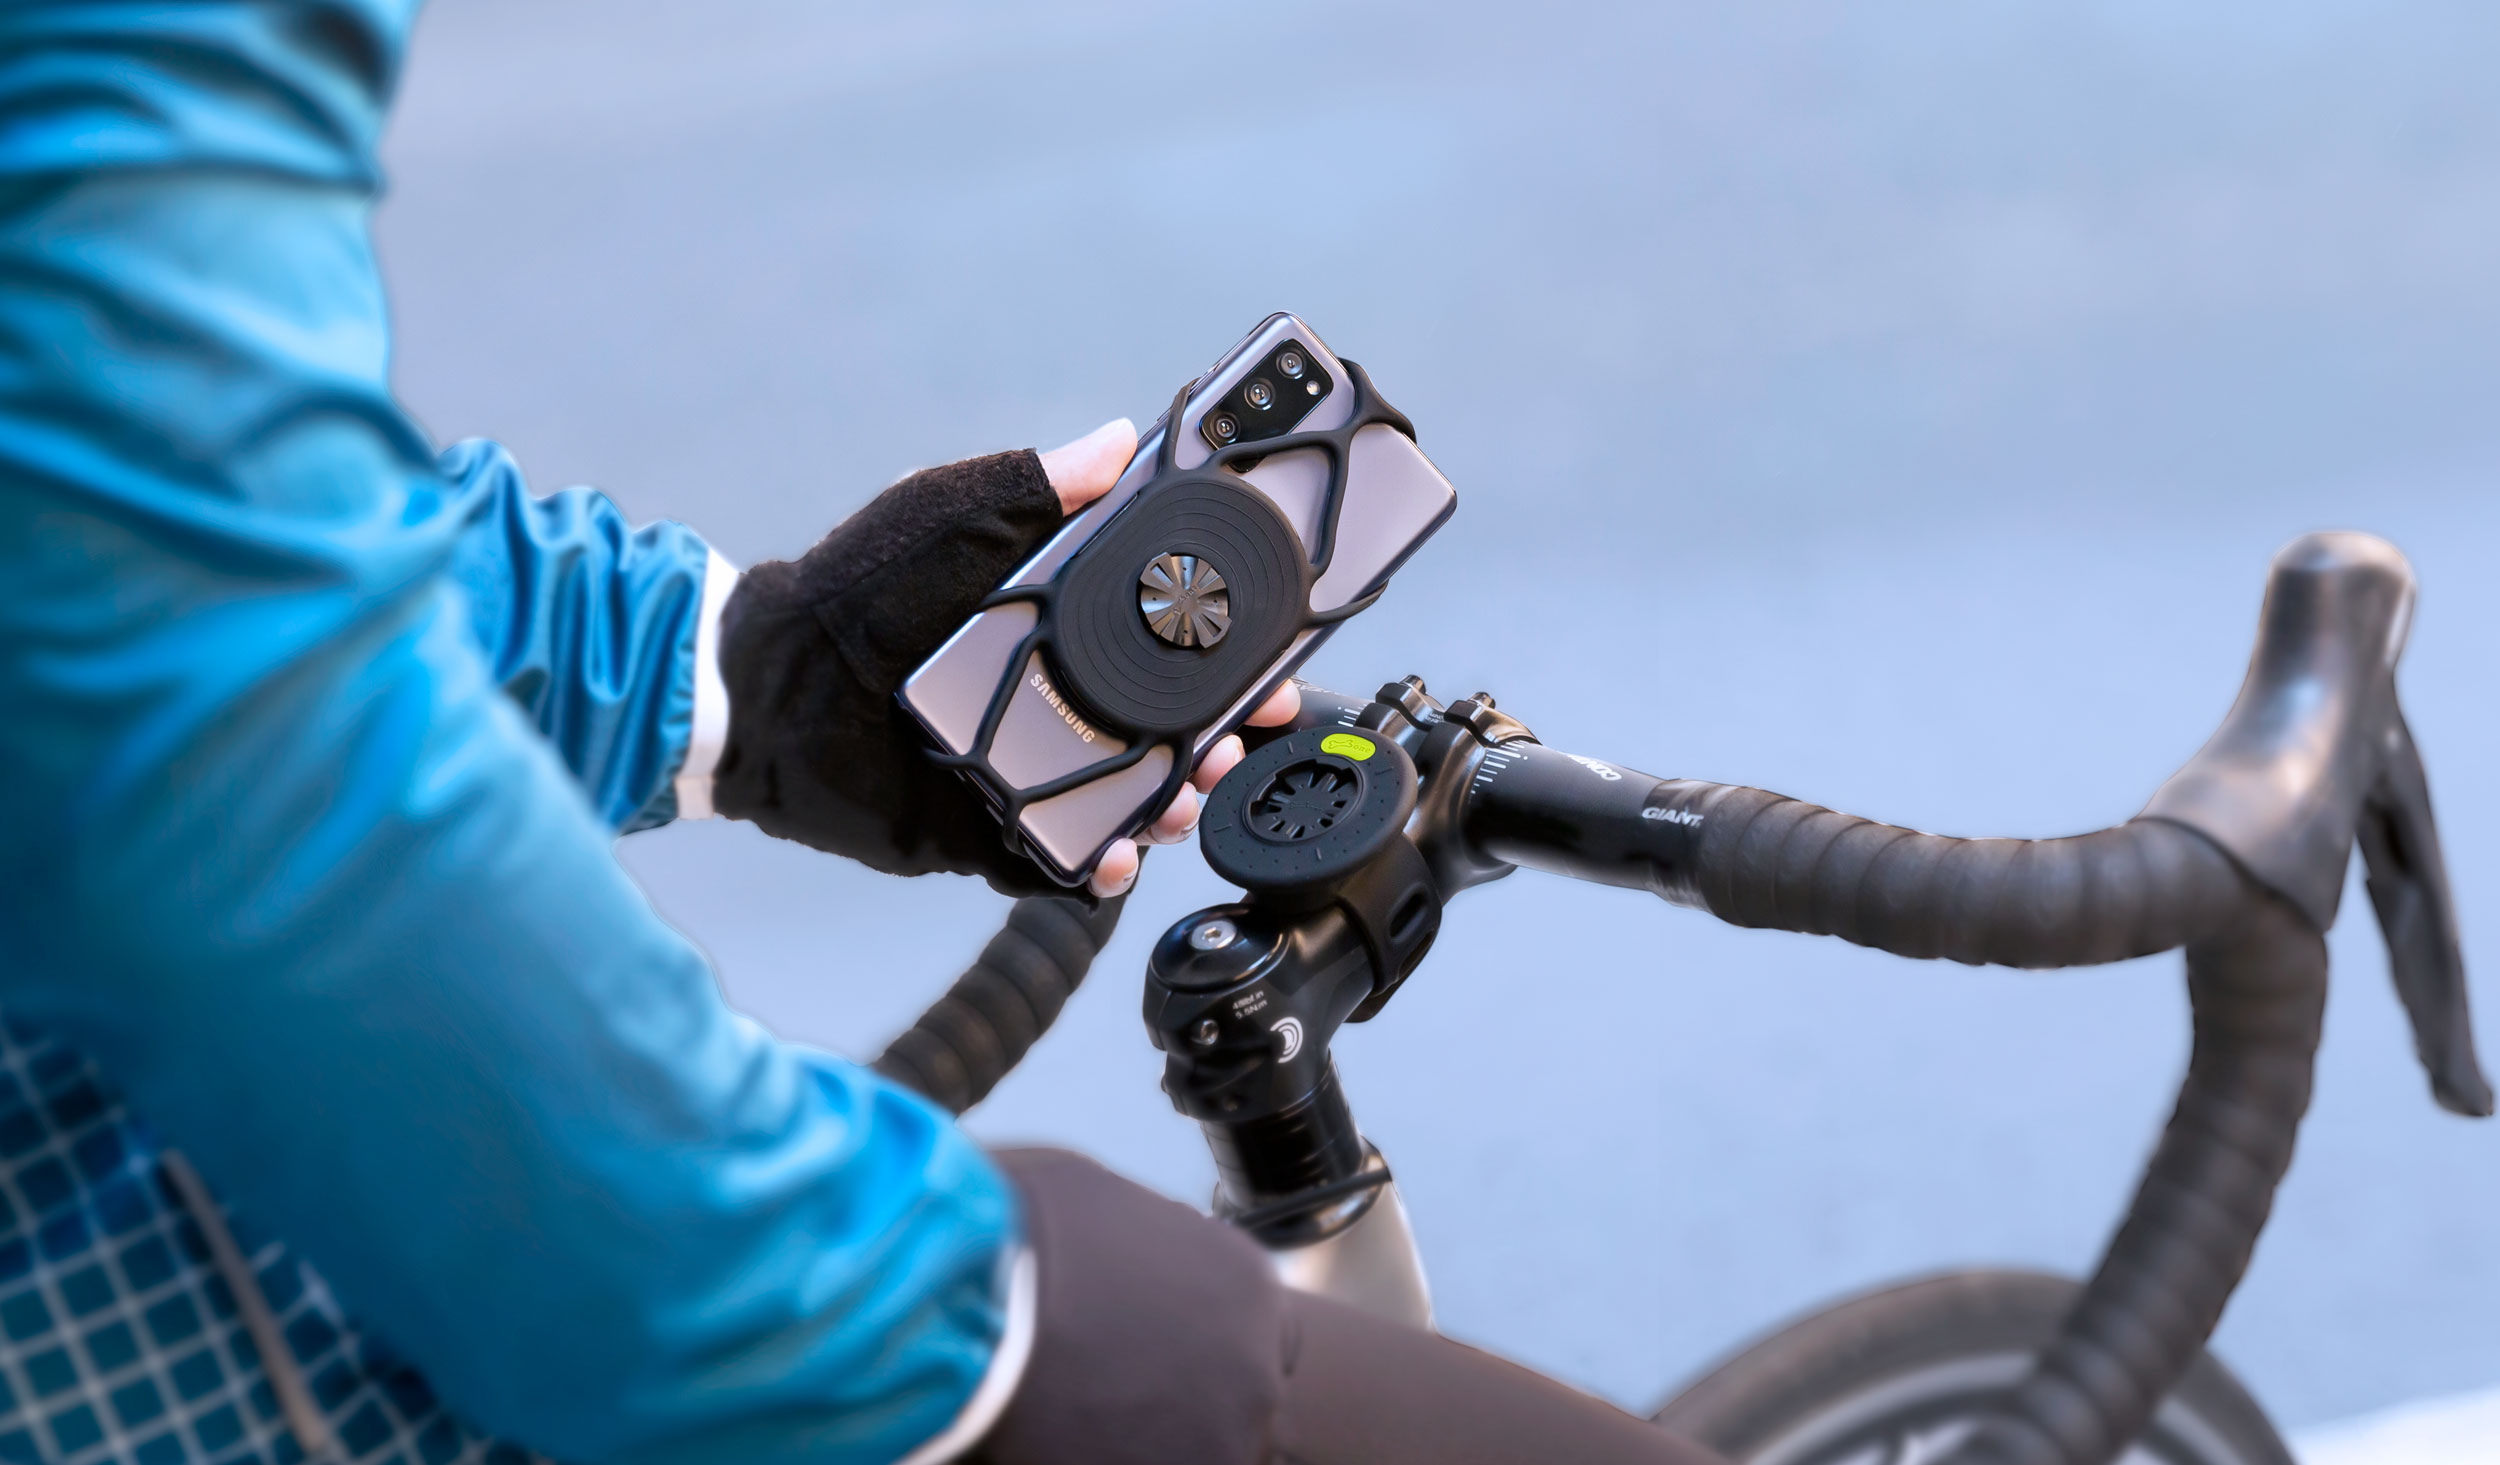 Bike Tie Connect Kit - Tie Connect Exchange System - Sport Life